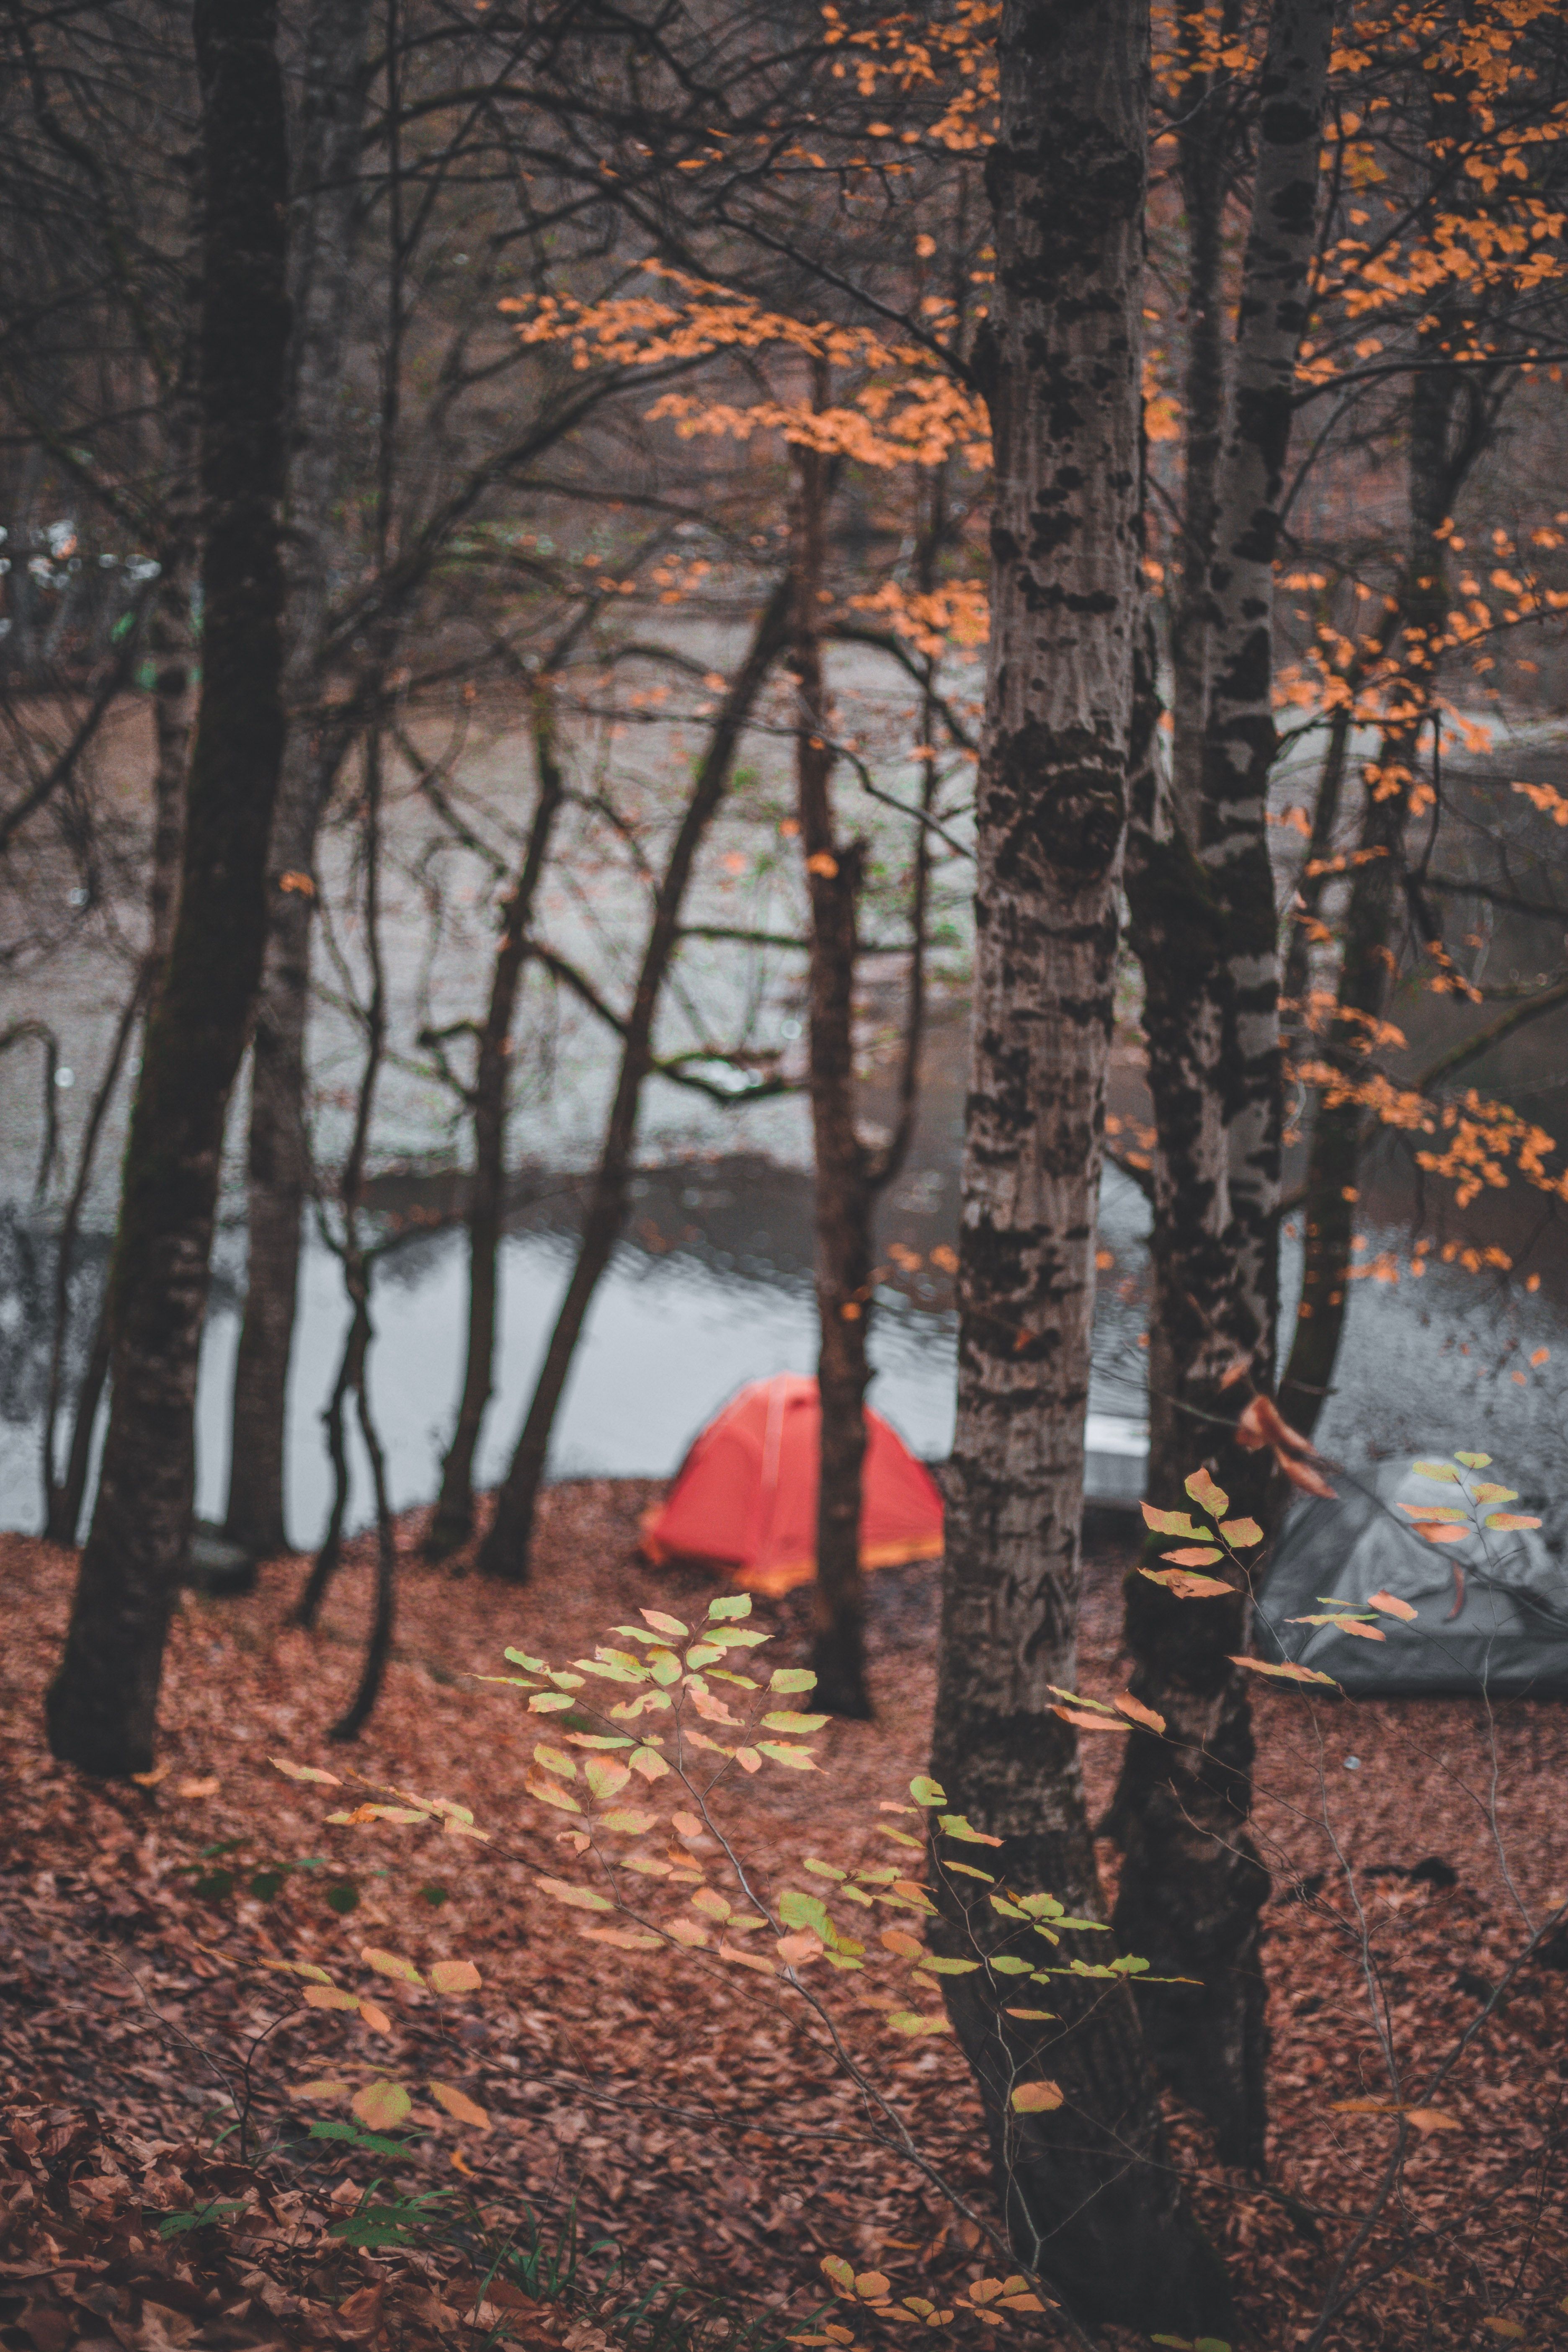 A tent is pitched in a forest, surrounded by trees and covered in fallen leaves. - Camping